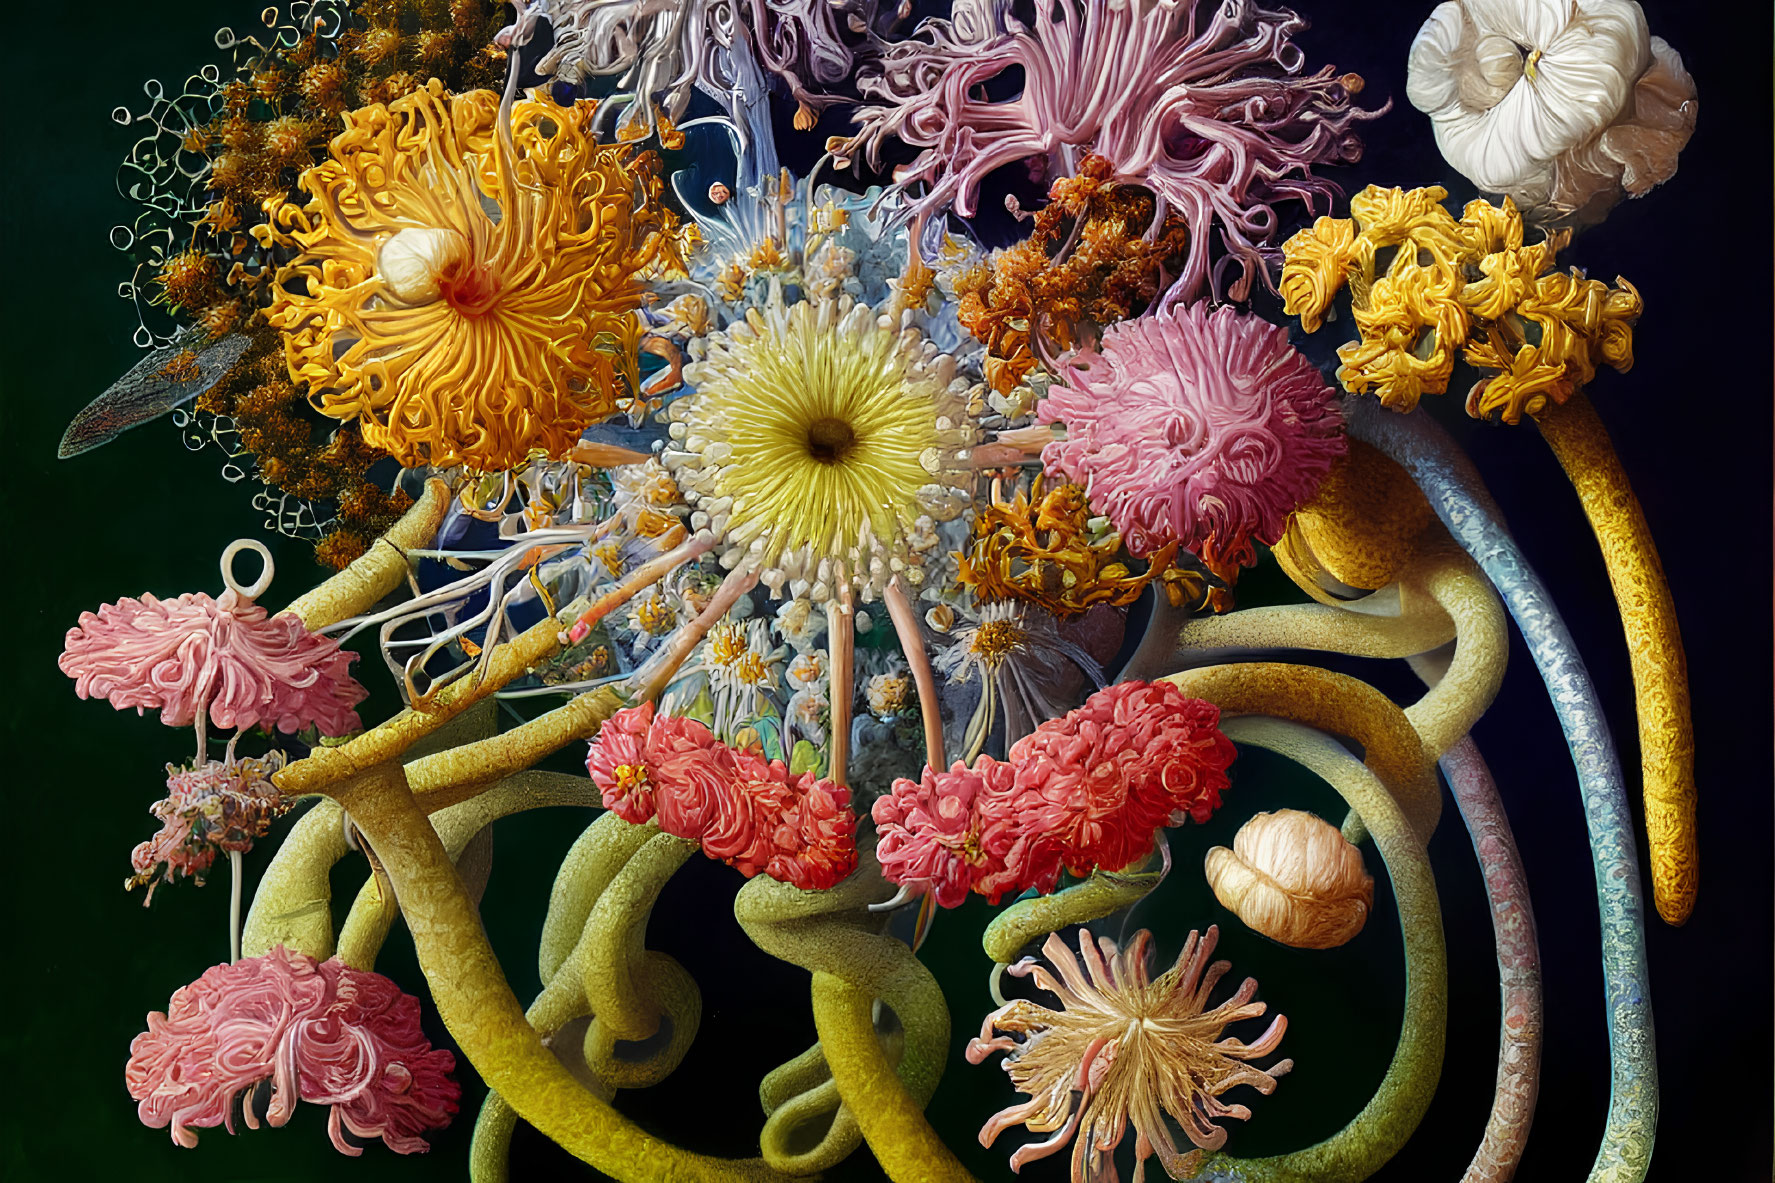 Detailed Surreal Botanical Still Life Painting with Vibrant Colors